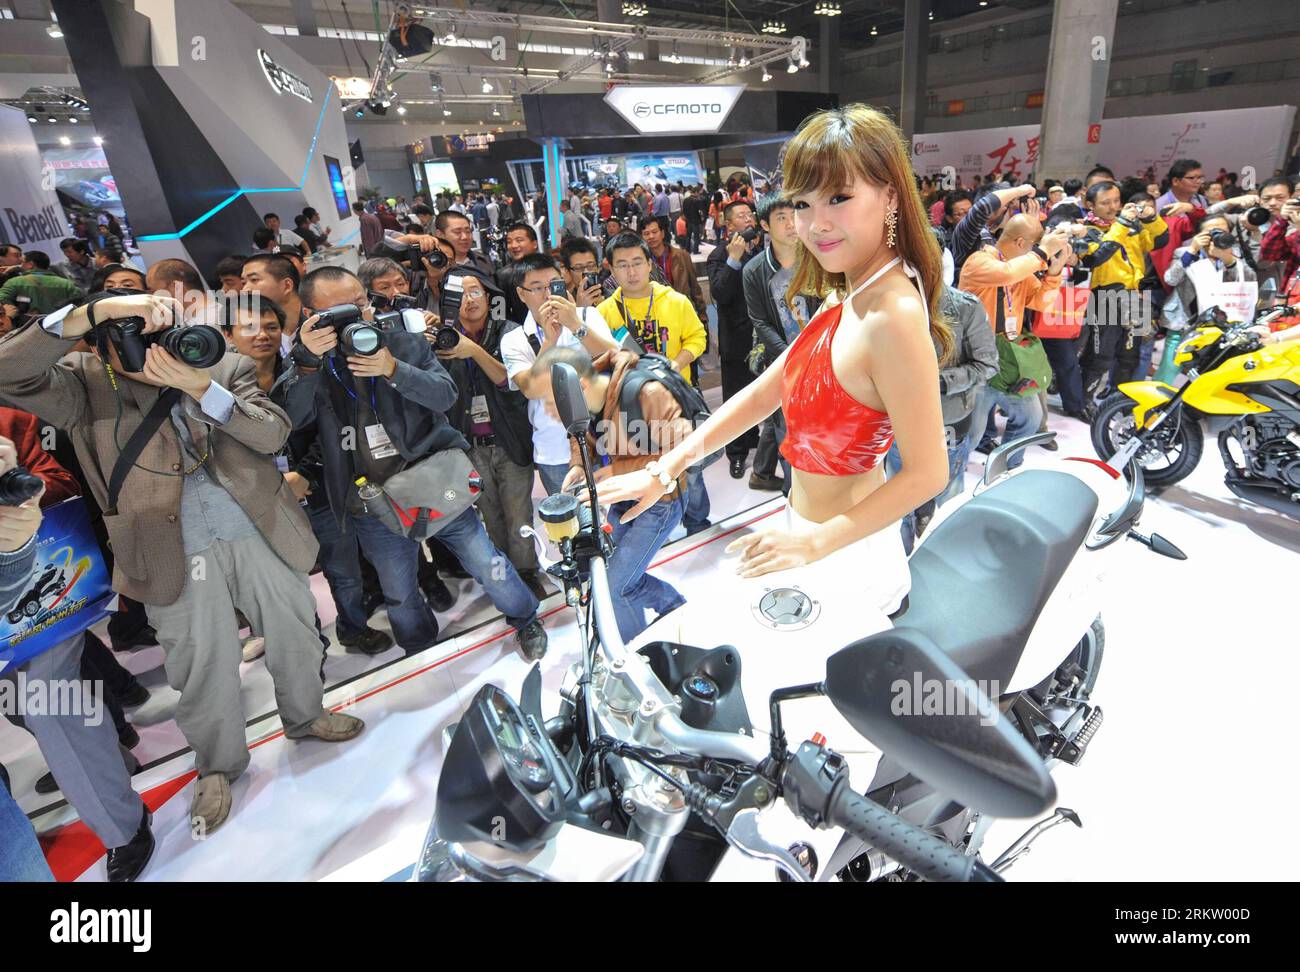 Bildnummer: 58577706  Datum: 11.10.2012  Copyright: imago/Xinhua (121011) -- CHONGQING, Oct. 11, 2012 (Xinhua) -- A model sits on a motorcycle exhibited in the 11th China International Motorcycle Trade Exhibition in southwest China s Chongqing Municipality, Oct. 11, 2012. More than 400 motorcycle companies from 10 countries and regions attended the four-day expo kicked off on Thursday. About 100 international traders also participated in the fair, and the purchase sum is expected to exceed 100 million U.S. dollars. (Xinhua/Liu Chan) (hy) CHINA-CHONGQING-MOTOR CYCLE EXPO-OPENING (CN) PUBLICATIO Stock Photo